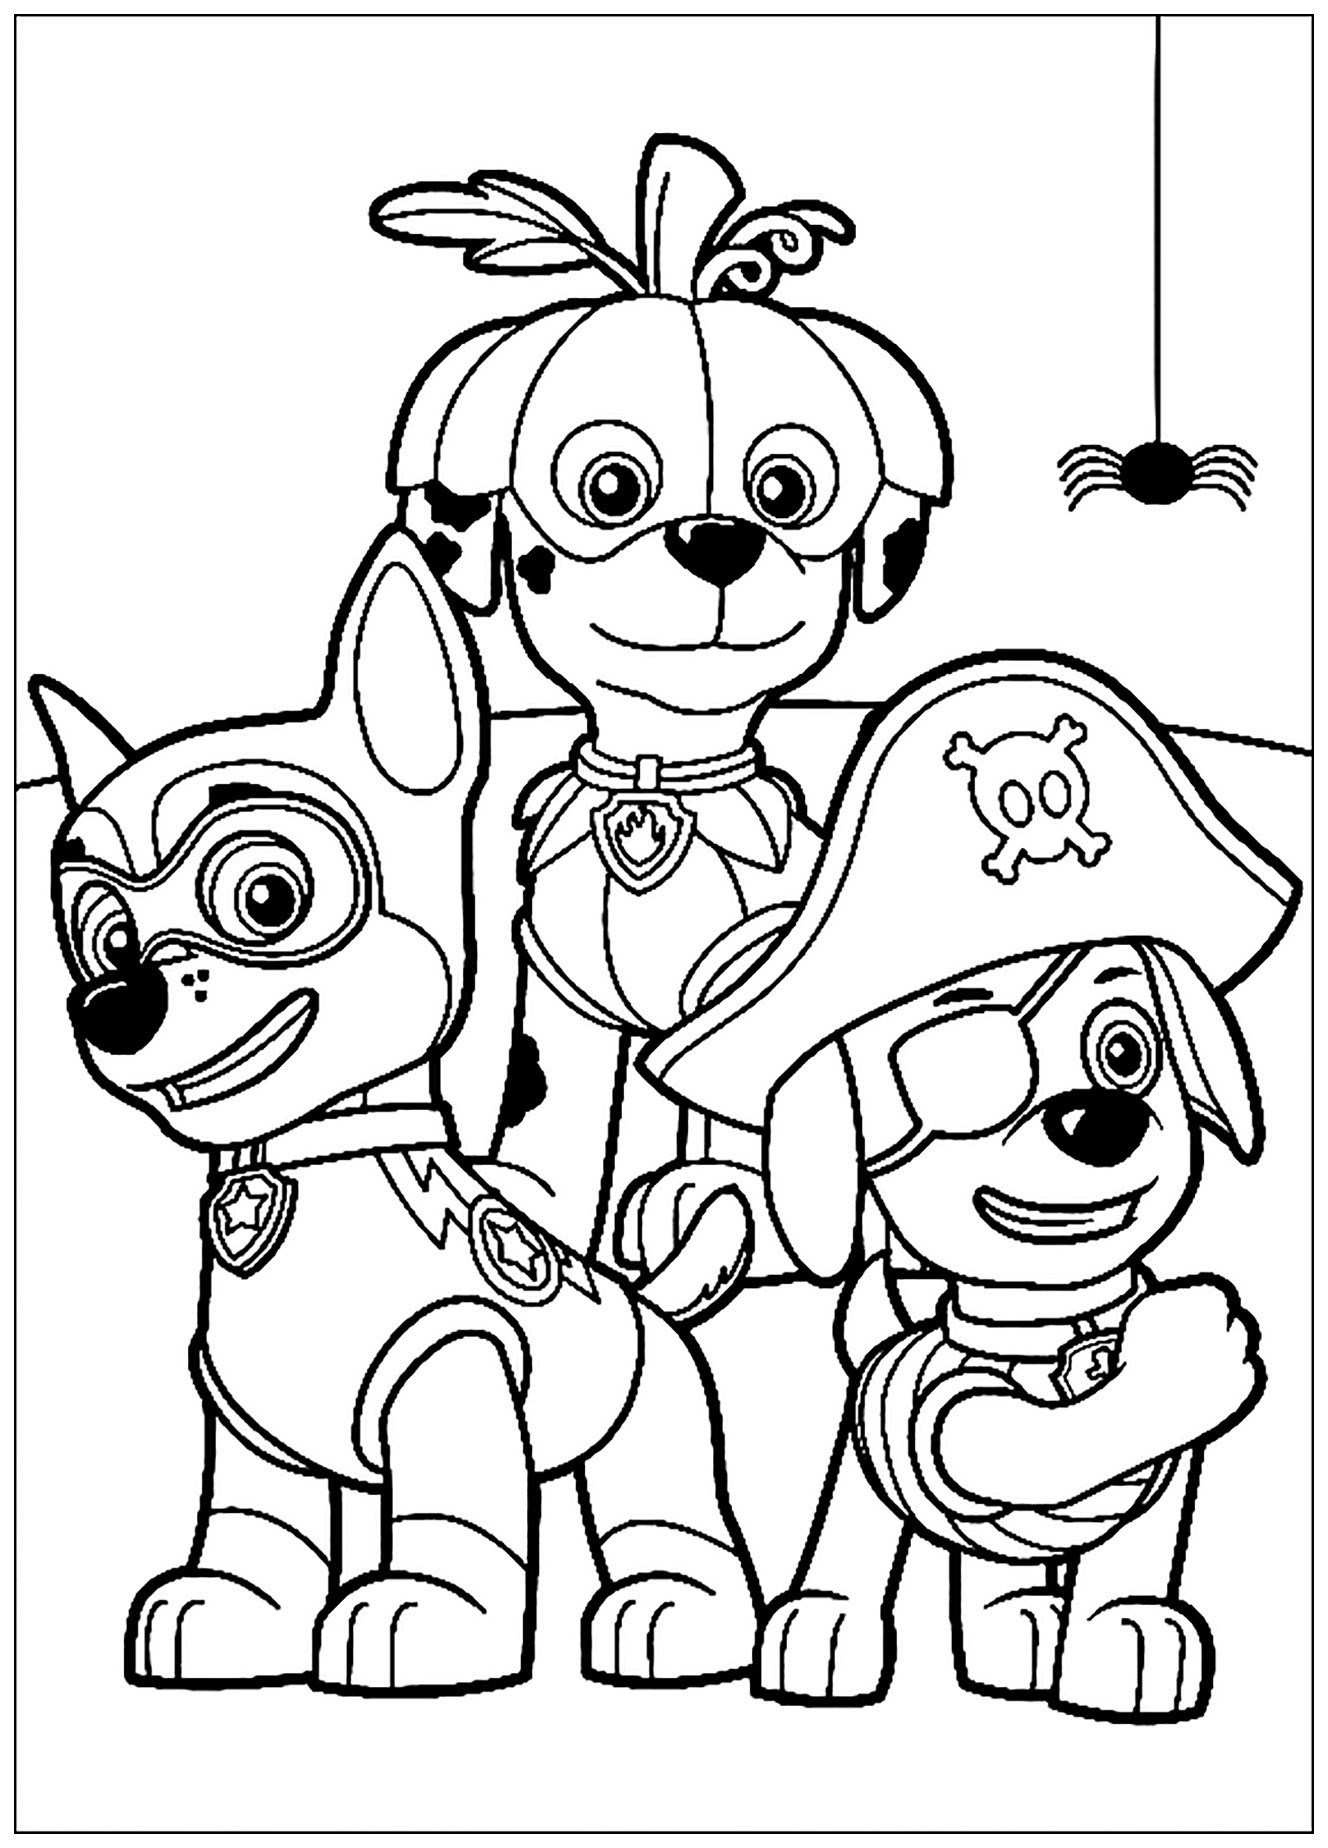 Chase Pat Patrouille Coloriage Inspiration Coloriage Pat Patrouille Chase Imprimer 2158 Pat